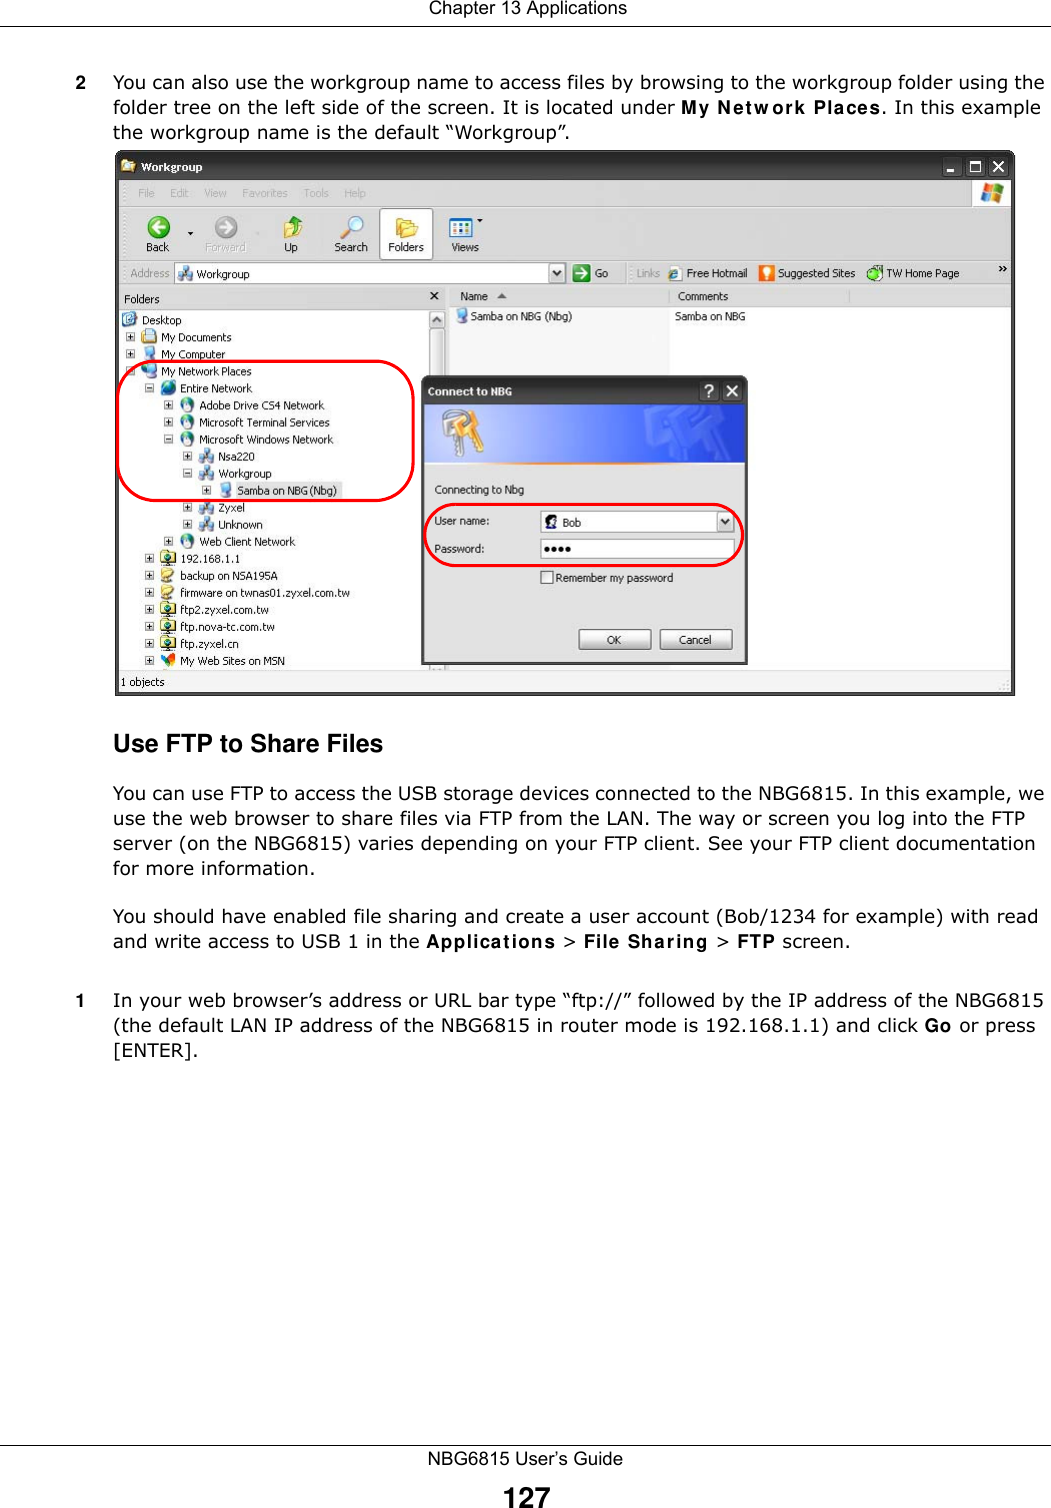  Chapter 13 ApplicationsNBG6815 User’s Guide1272You can also use the workgroup name to access files by browsing to the workgroup folder using the folder tree on the left side of the screen. It is located under My Network Places. In this example the workgroup name is the default “Workgroup”. Use FTP to Share FilesYou can use FTP to access the USB storage devices connected to the NBG6815. In this example, we use the web browser to share files via FTP from the LAN. The way or screen you log into the FTP server (on the NBG6815) varies depending on your FTP client. See your FTP client documentation for more information. You should have enabled file sharing and create a user account (Bob/1234 for example) with read and write access to USB 1 in the Applications &gt; File Sharing &gt; FTP screen.1In your web browser’s address or URL bar type “ftp://” followed by the IP address of the NBG6815 (the default LAN IP address of the NBG6815 in router mode is 192.168.1.1) and click Go or press [ENTER].